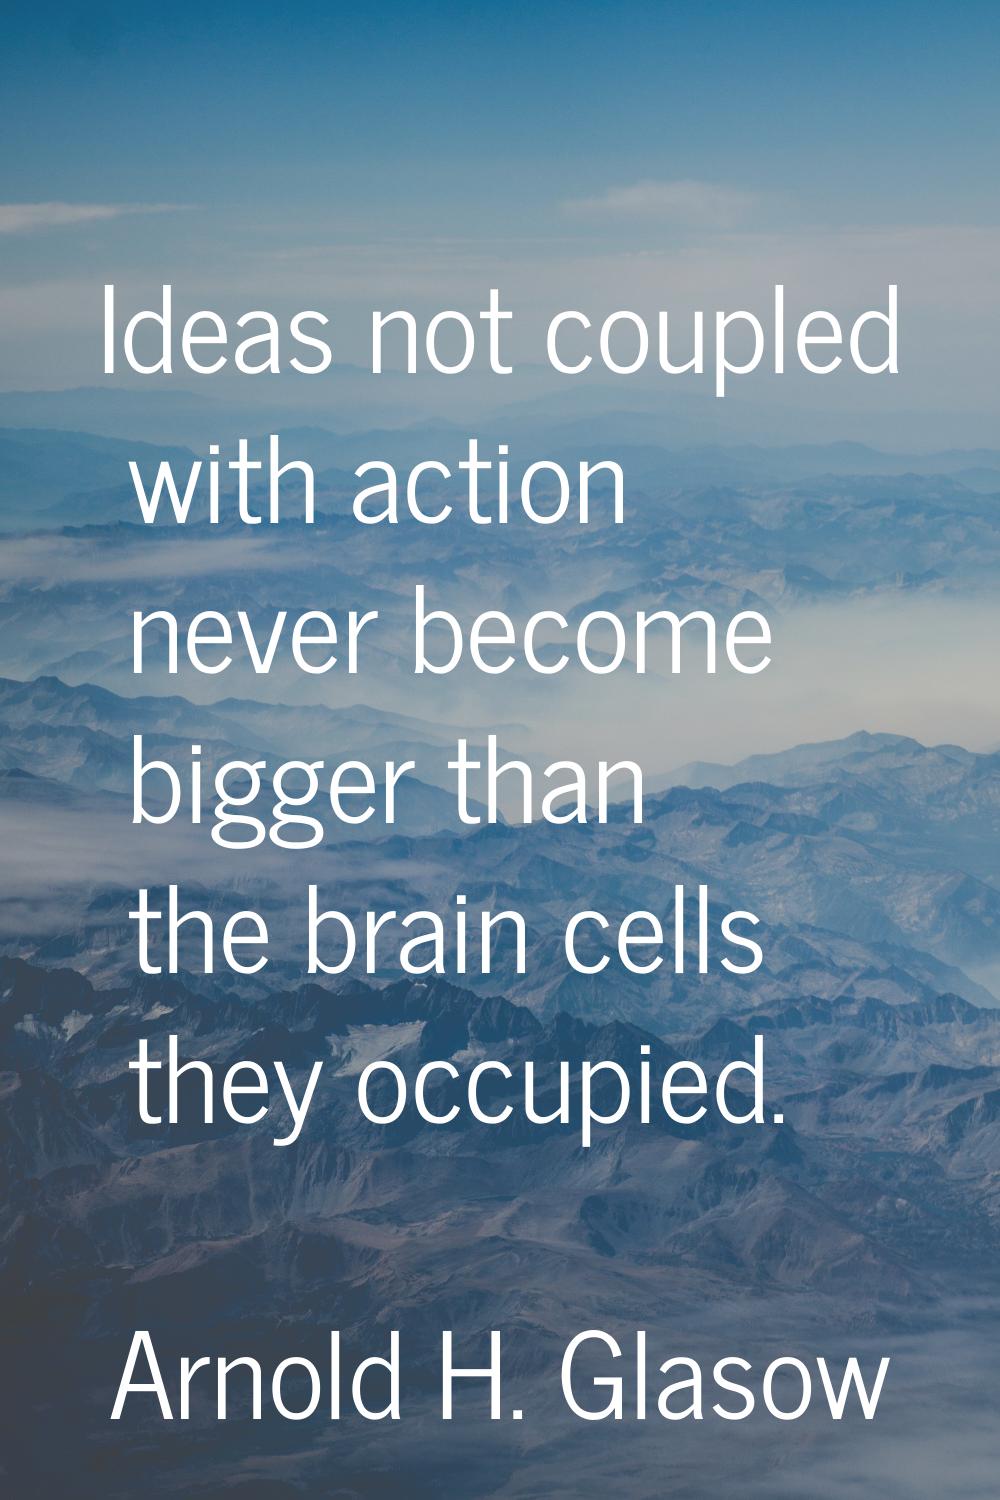 Ideas not coupled with action never become bigger than the brain cells they occupied.